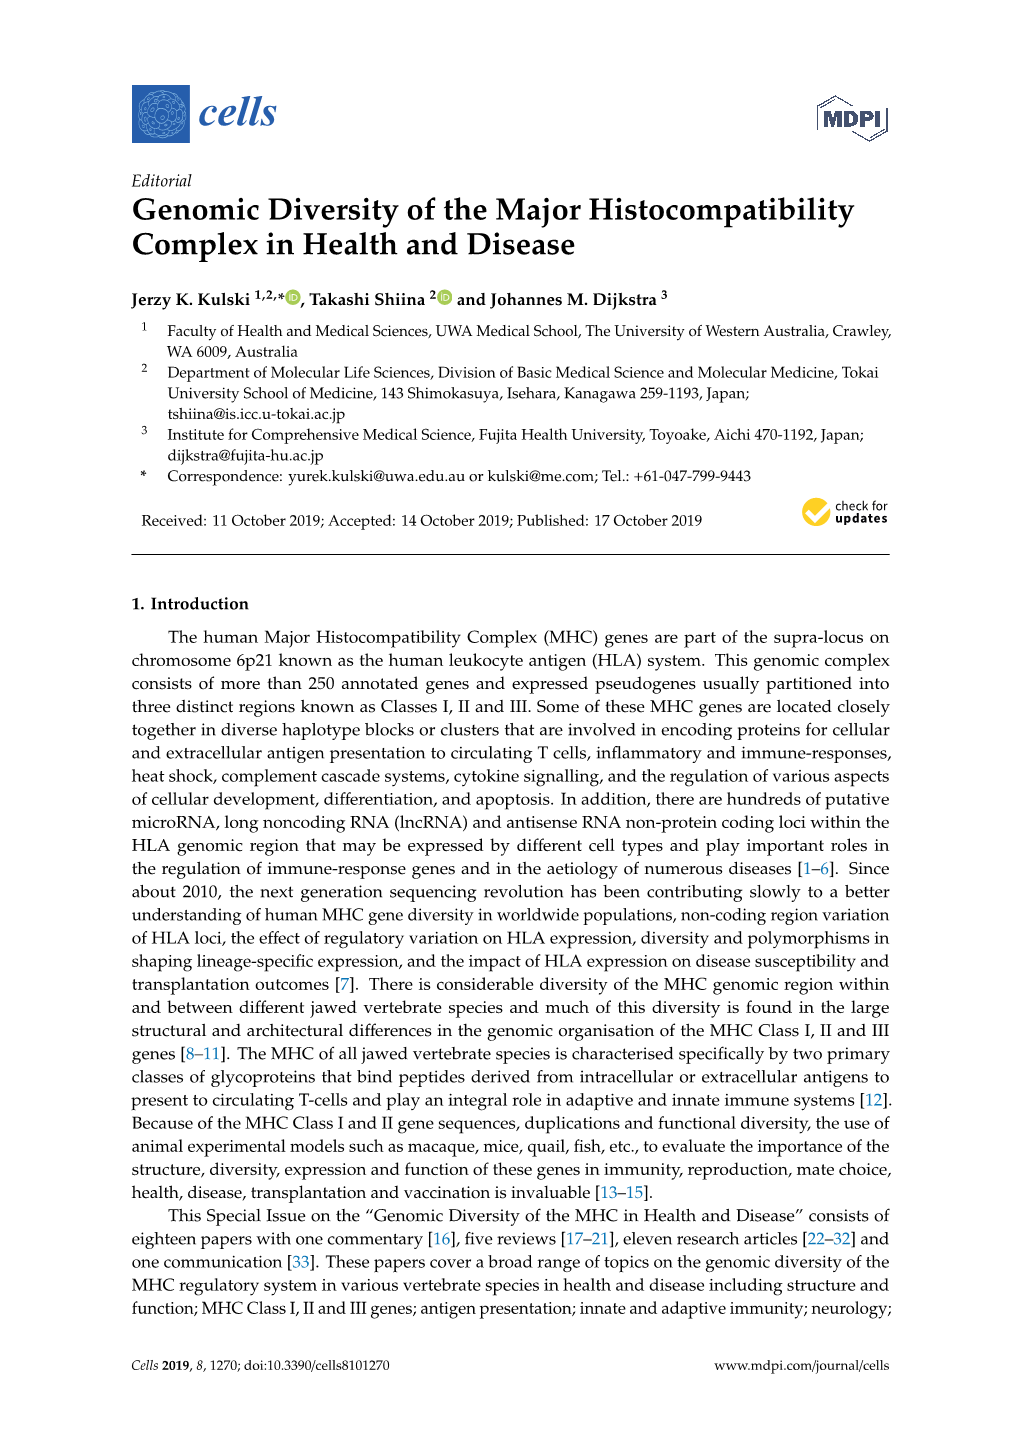 Genomic Diversity of the Major Histocompatibility Complex in Health and Disease